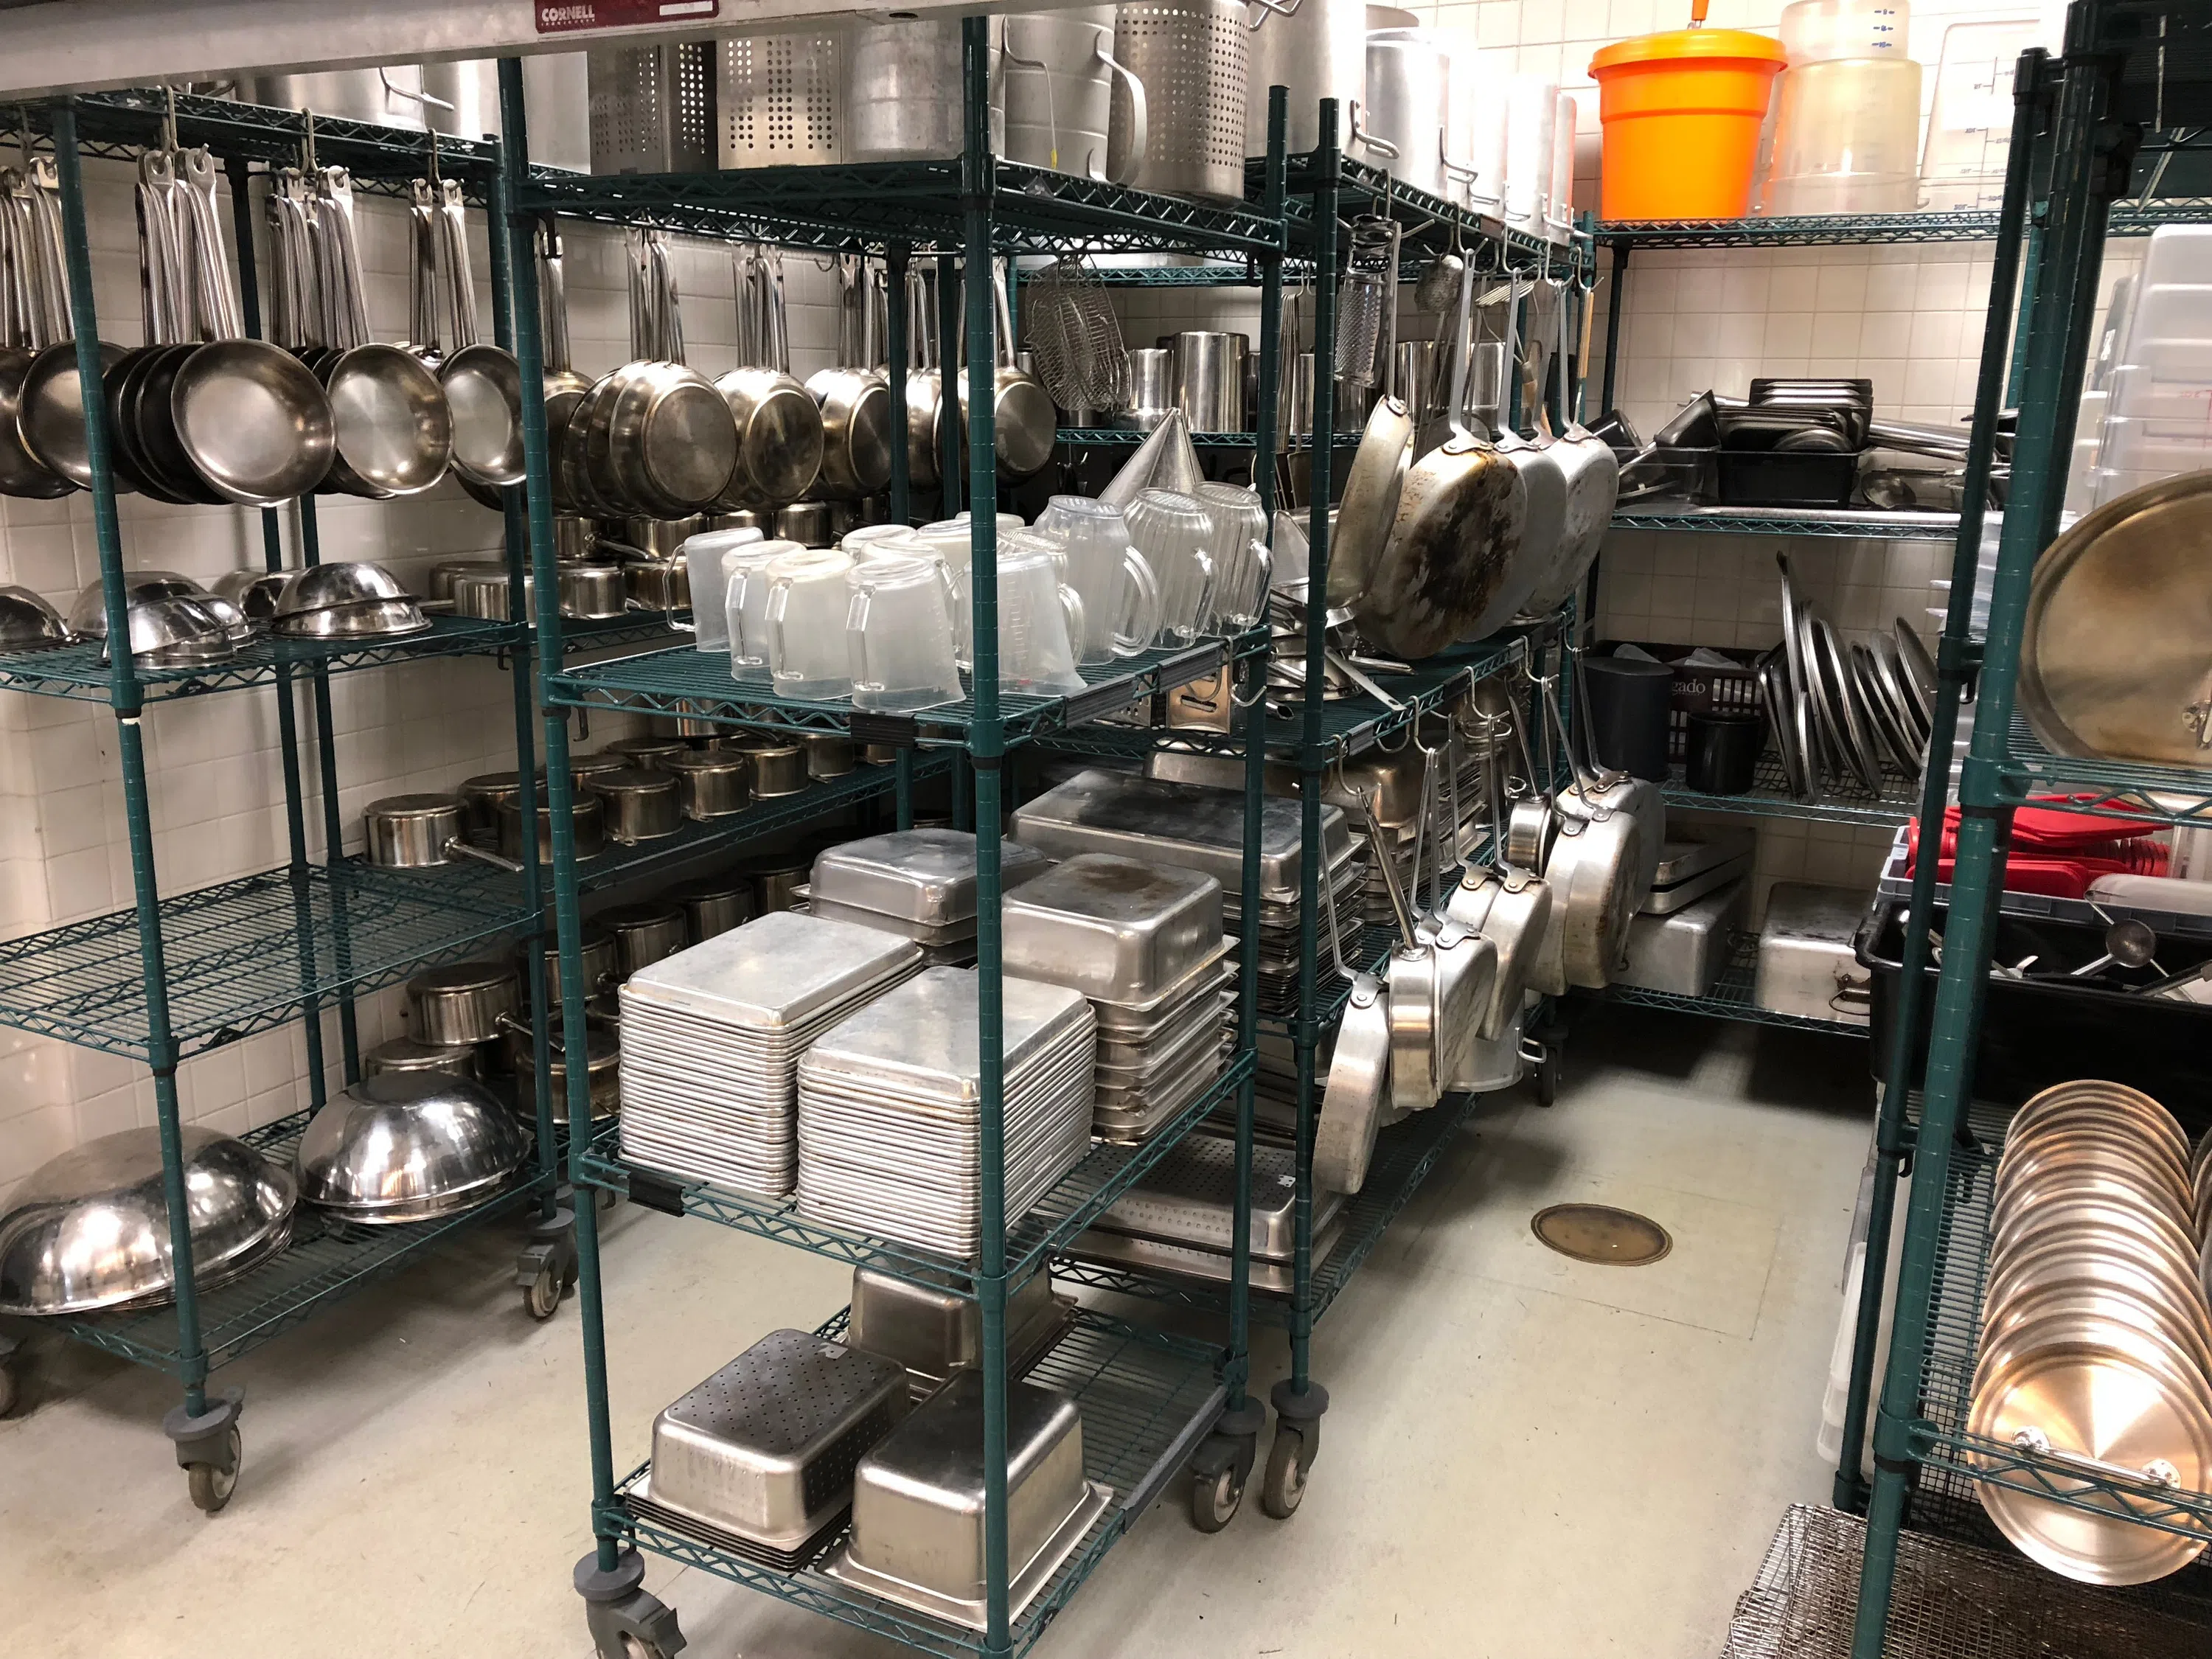 cookware hanging and on shelves in storage room